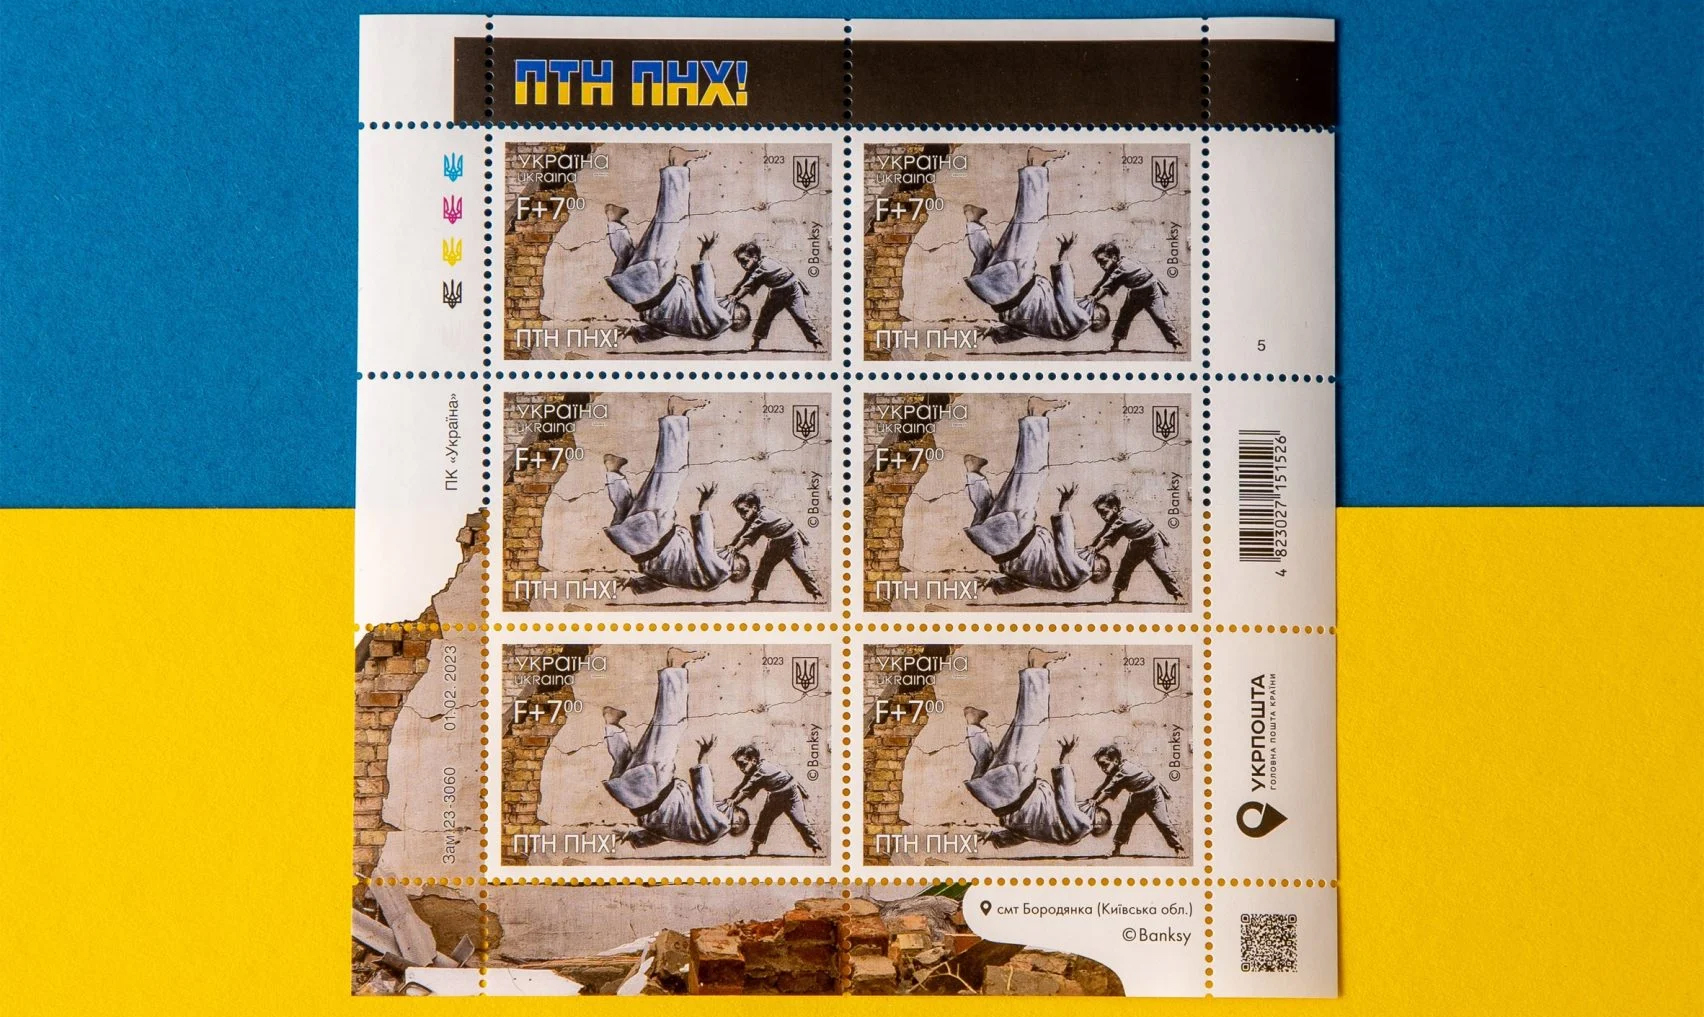 Stamps marking one year since the Russian invasion